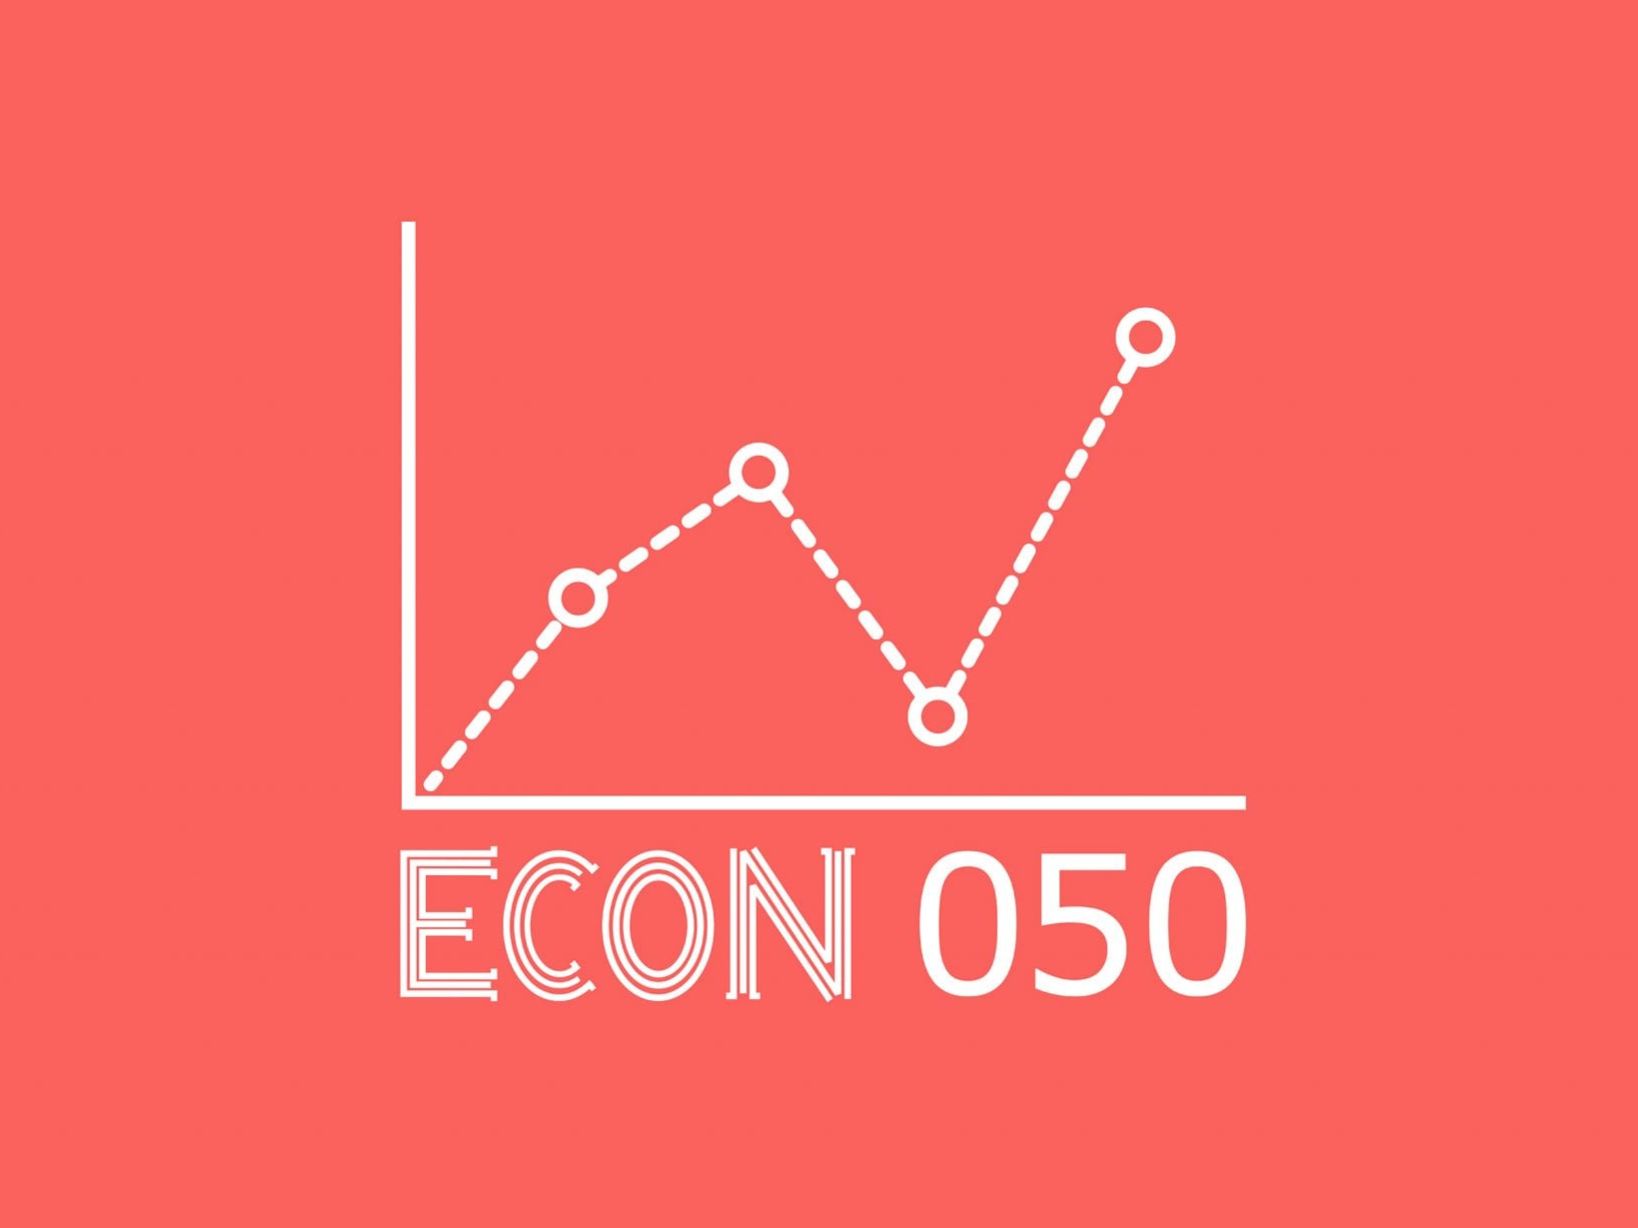 Econ 050 is a podcast on the economics and business news that matters to the Netherlands and the wider world, made by the Faculty of Economics and Business and the Northern Times.